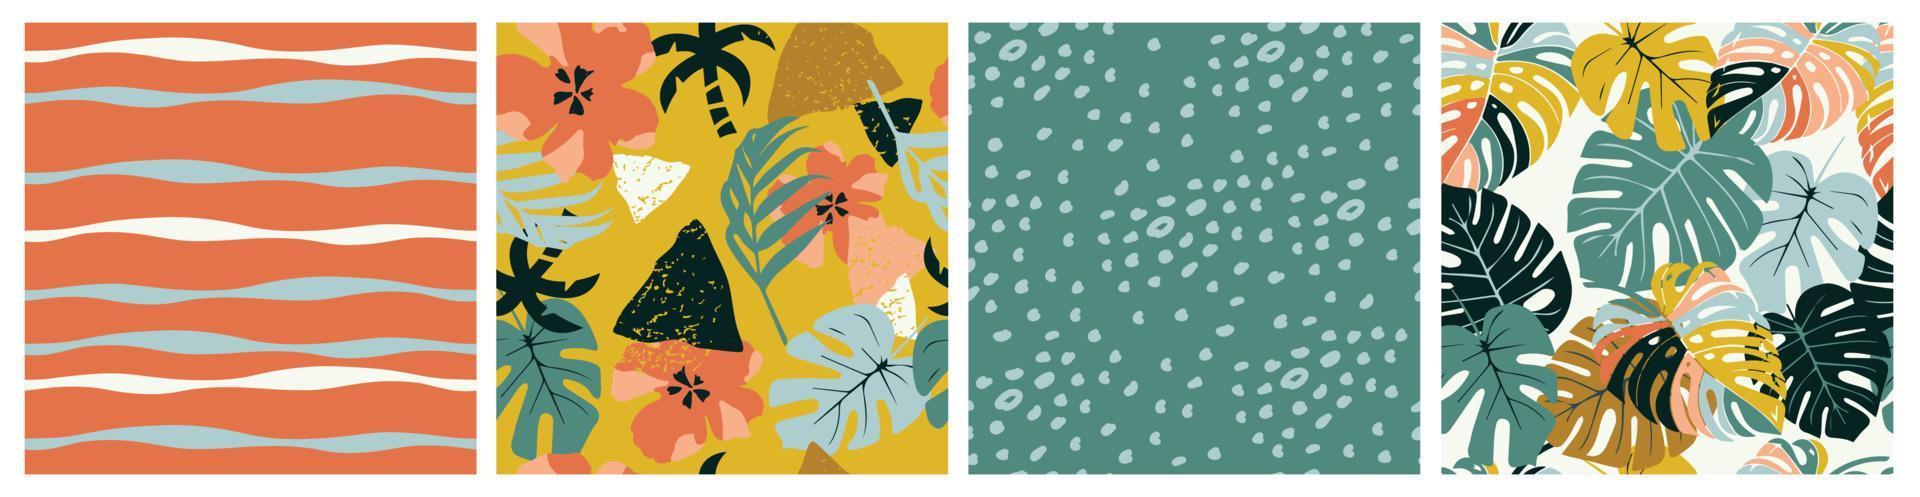 Set of Hand drawn tropical leaf and flowers, polka dot, abstract backgrounds. Seamless patterns with floral for fabric, textiles, clothing, wrapping paper, cover, interior decor. vector